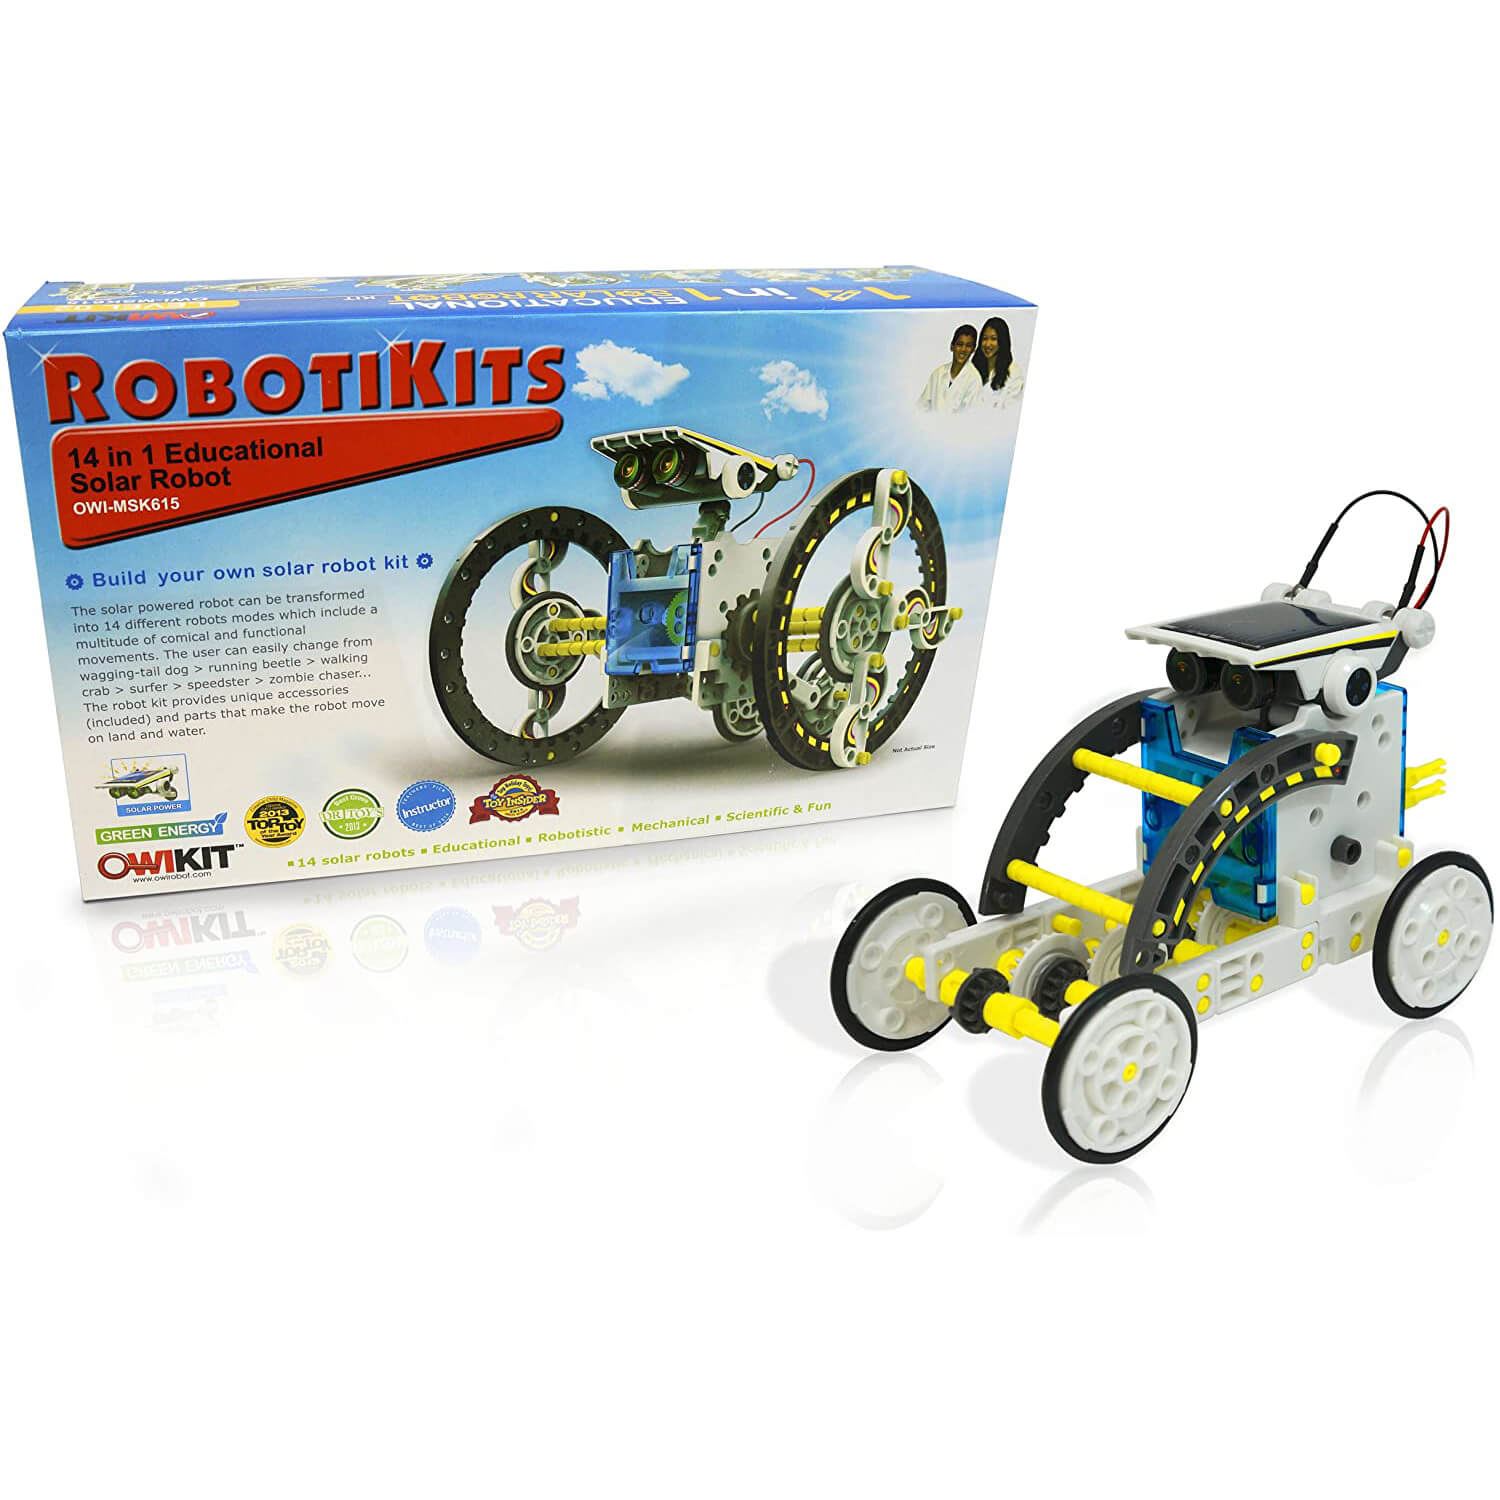 OWI 14-in-1 Educational Solar Robot